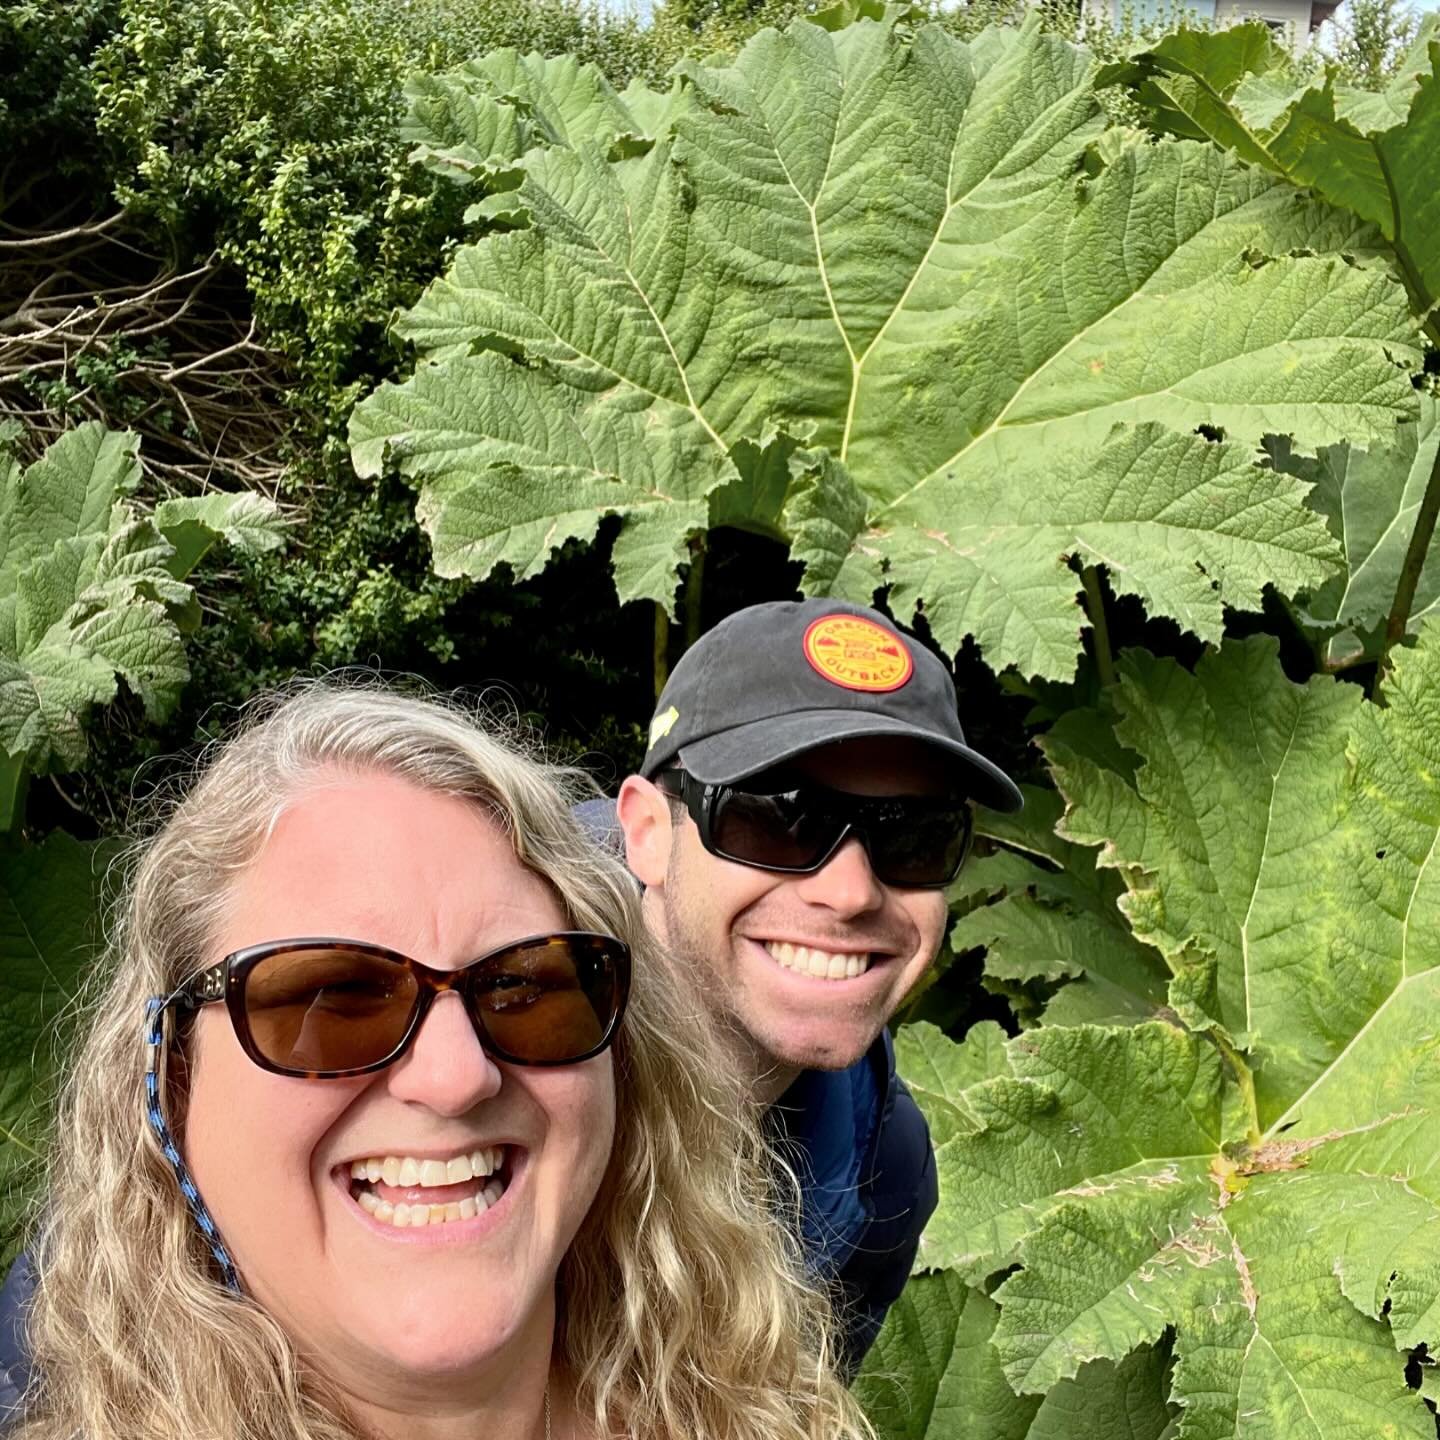 Did you know a Chilean rhubarb has leaves that can grow up to 8.2 feet (2.5 m) across! 🍃

While at Peace Arch Park on 9/20/21, Dylan and I stopped at a small garden there where they had some of these huge plants and I needed to know what they were! 